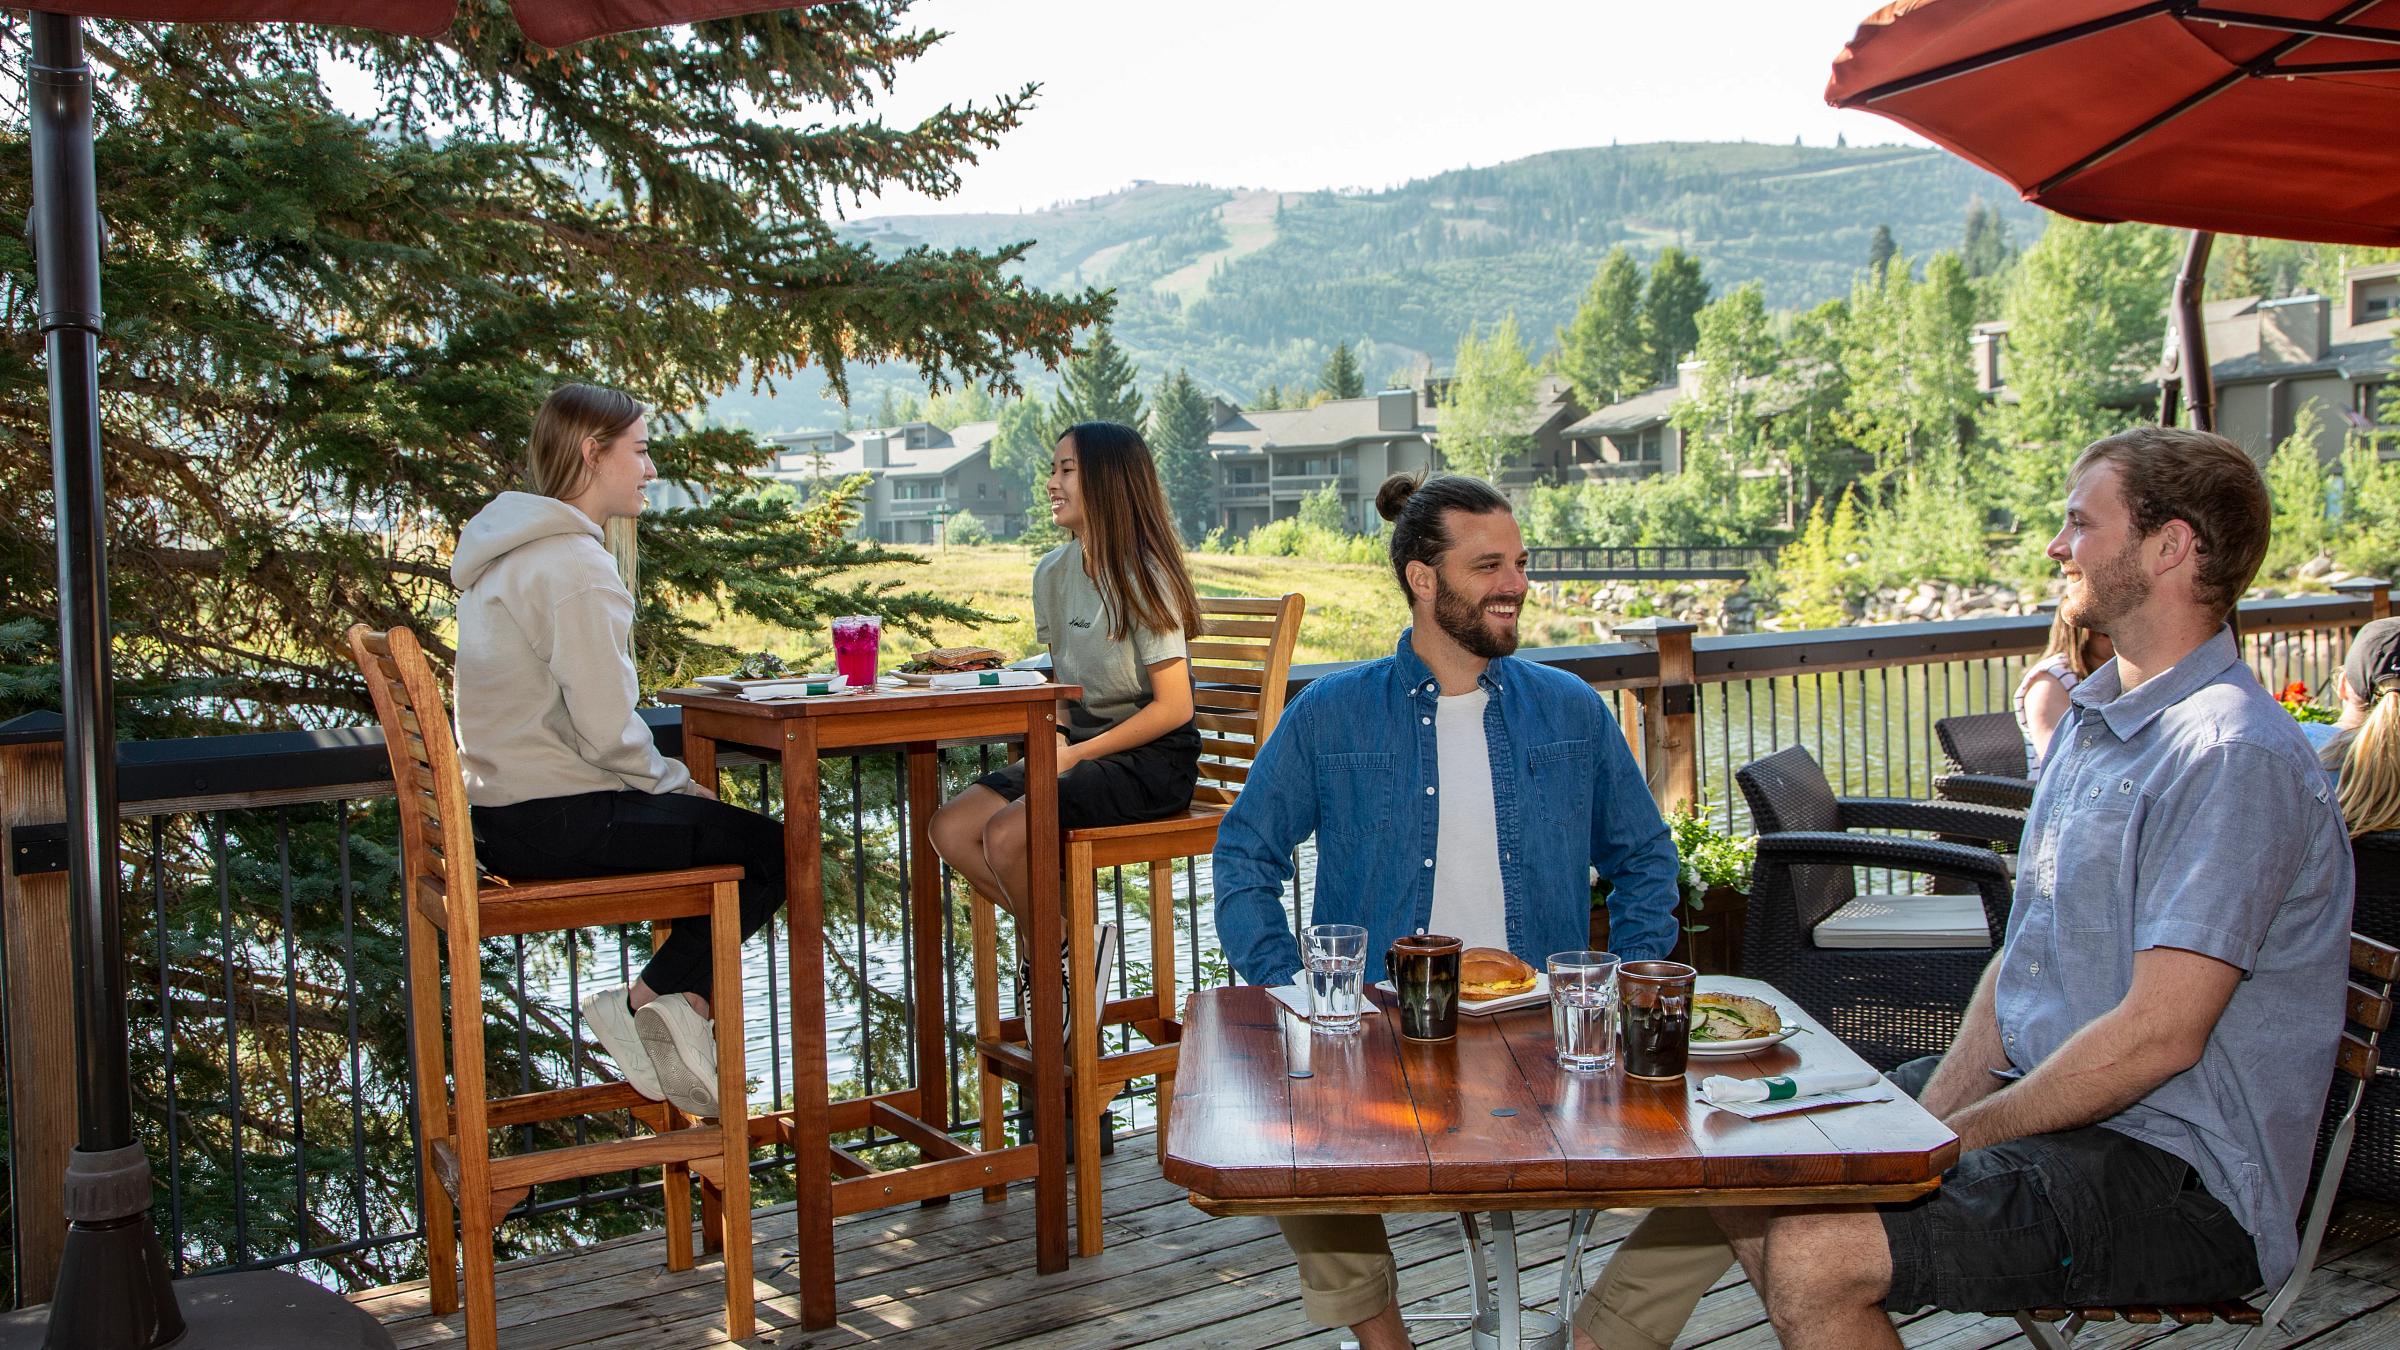 Diners enjoy a meal on the deck at Deer Valley in Park City, Utah